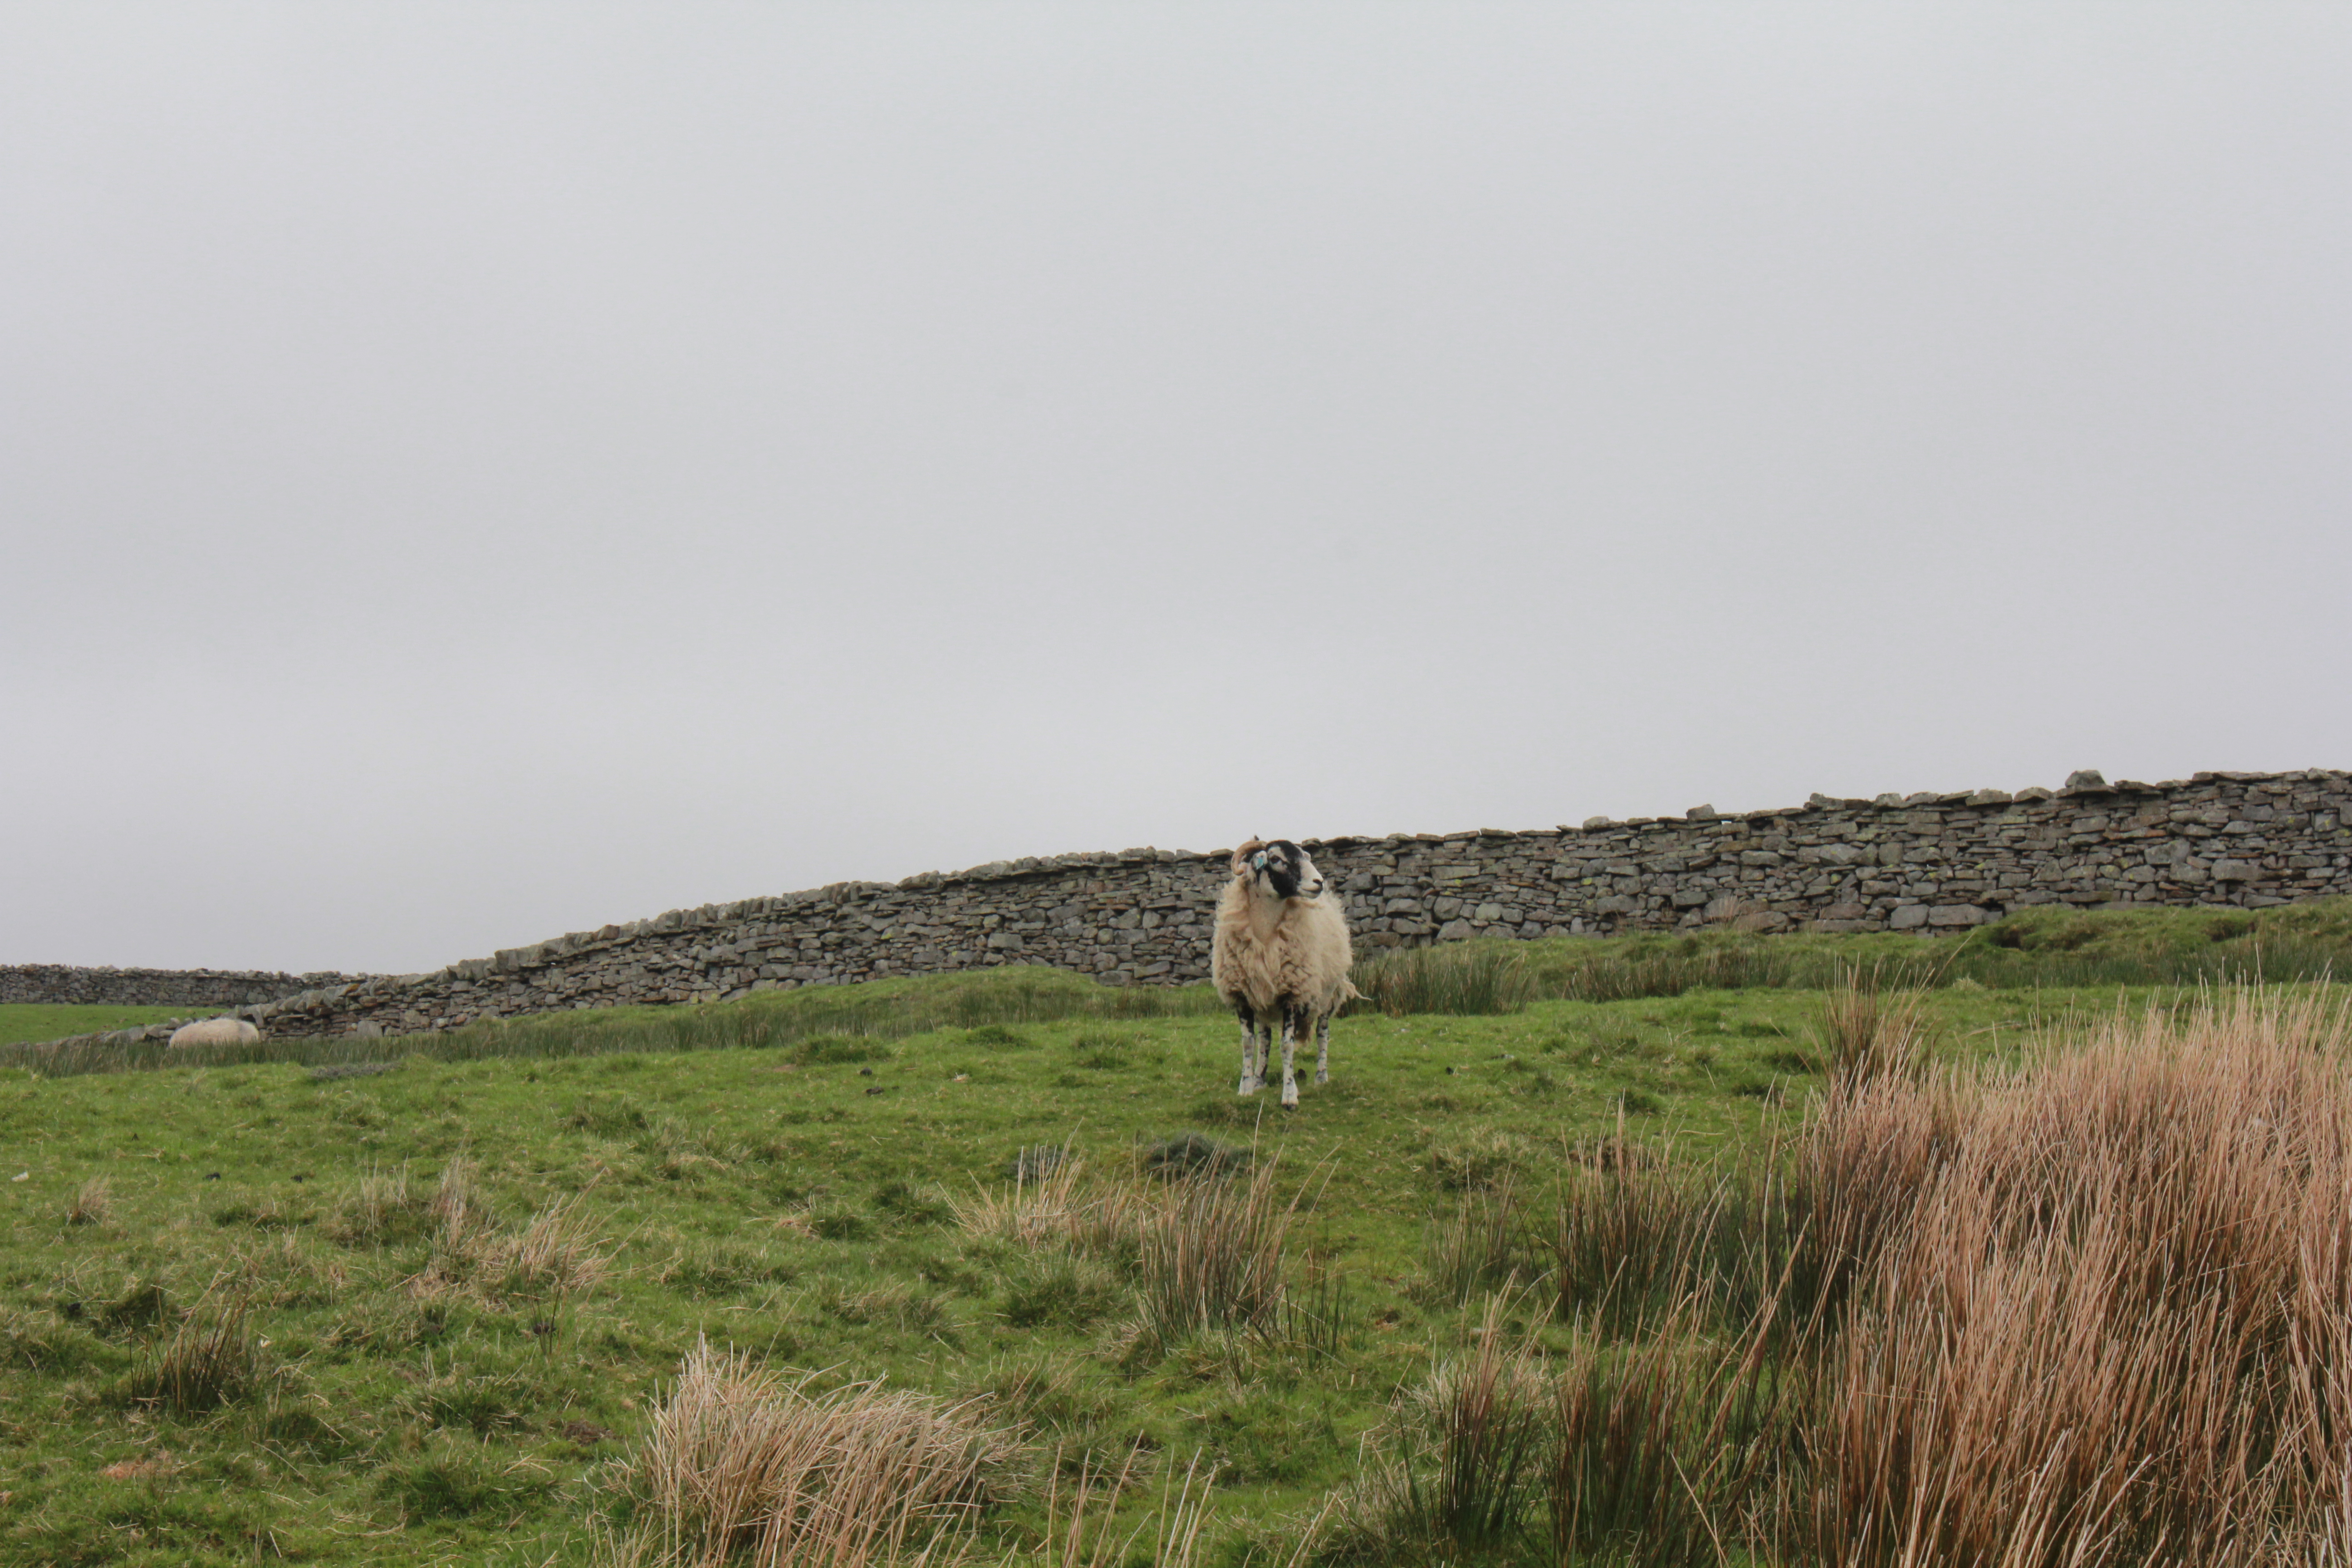 A sheep surveys its domain somewhere en route from Muker to Clover Lodge